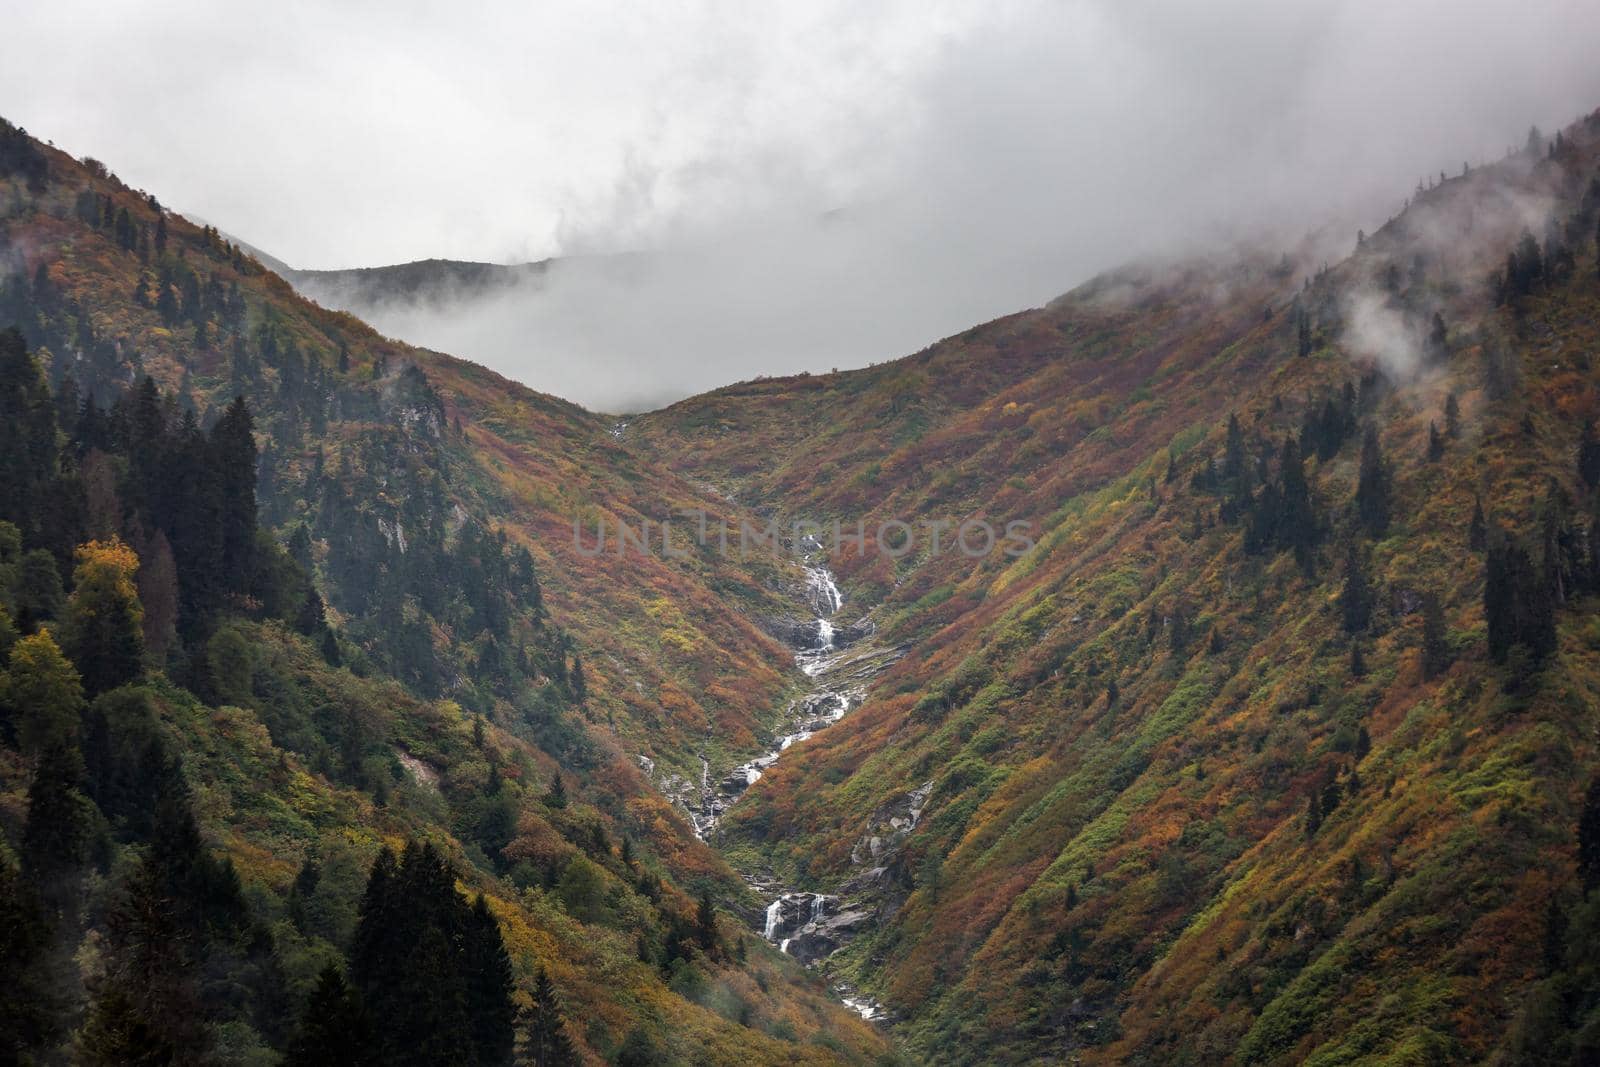 Ayder Plateau Natural Gelintulu Waterfall surrounded by autumn colors near Rize, Turkey.